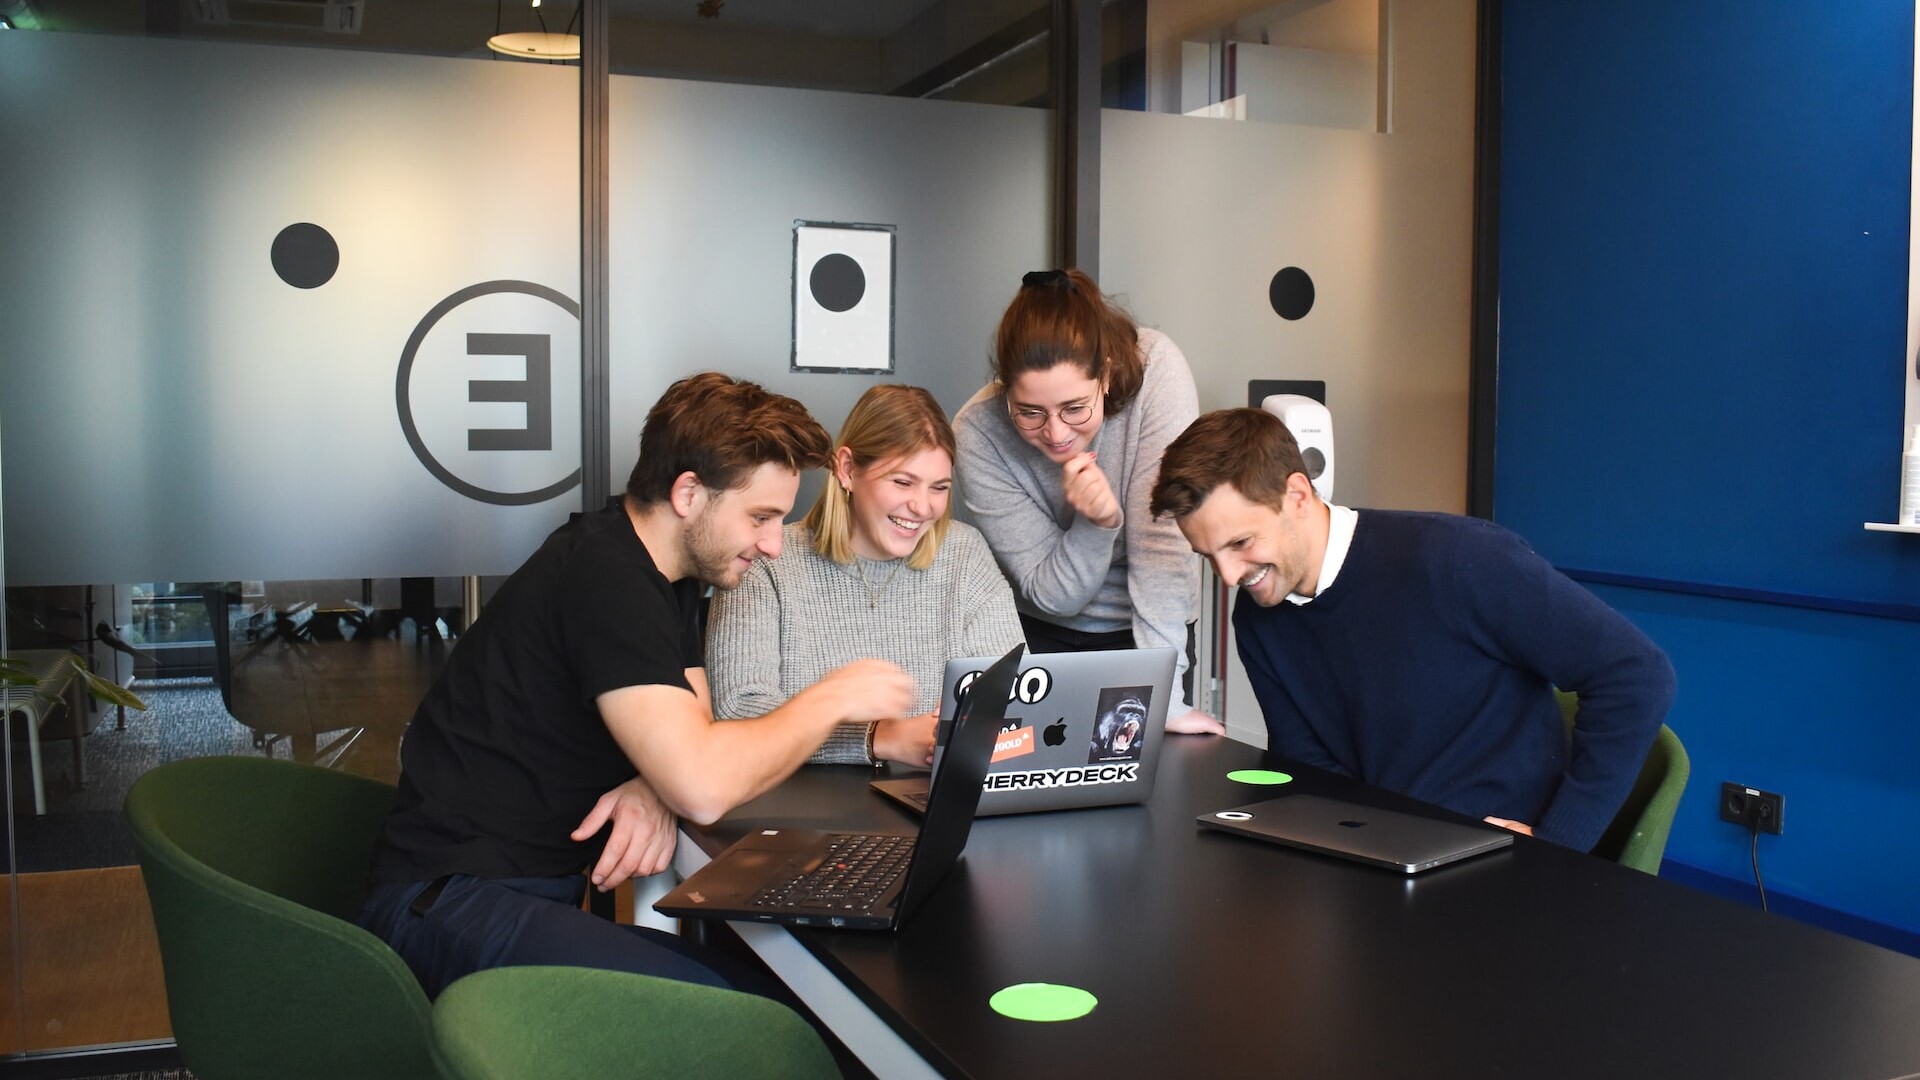 people working on a laptop together while smiling.